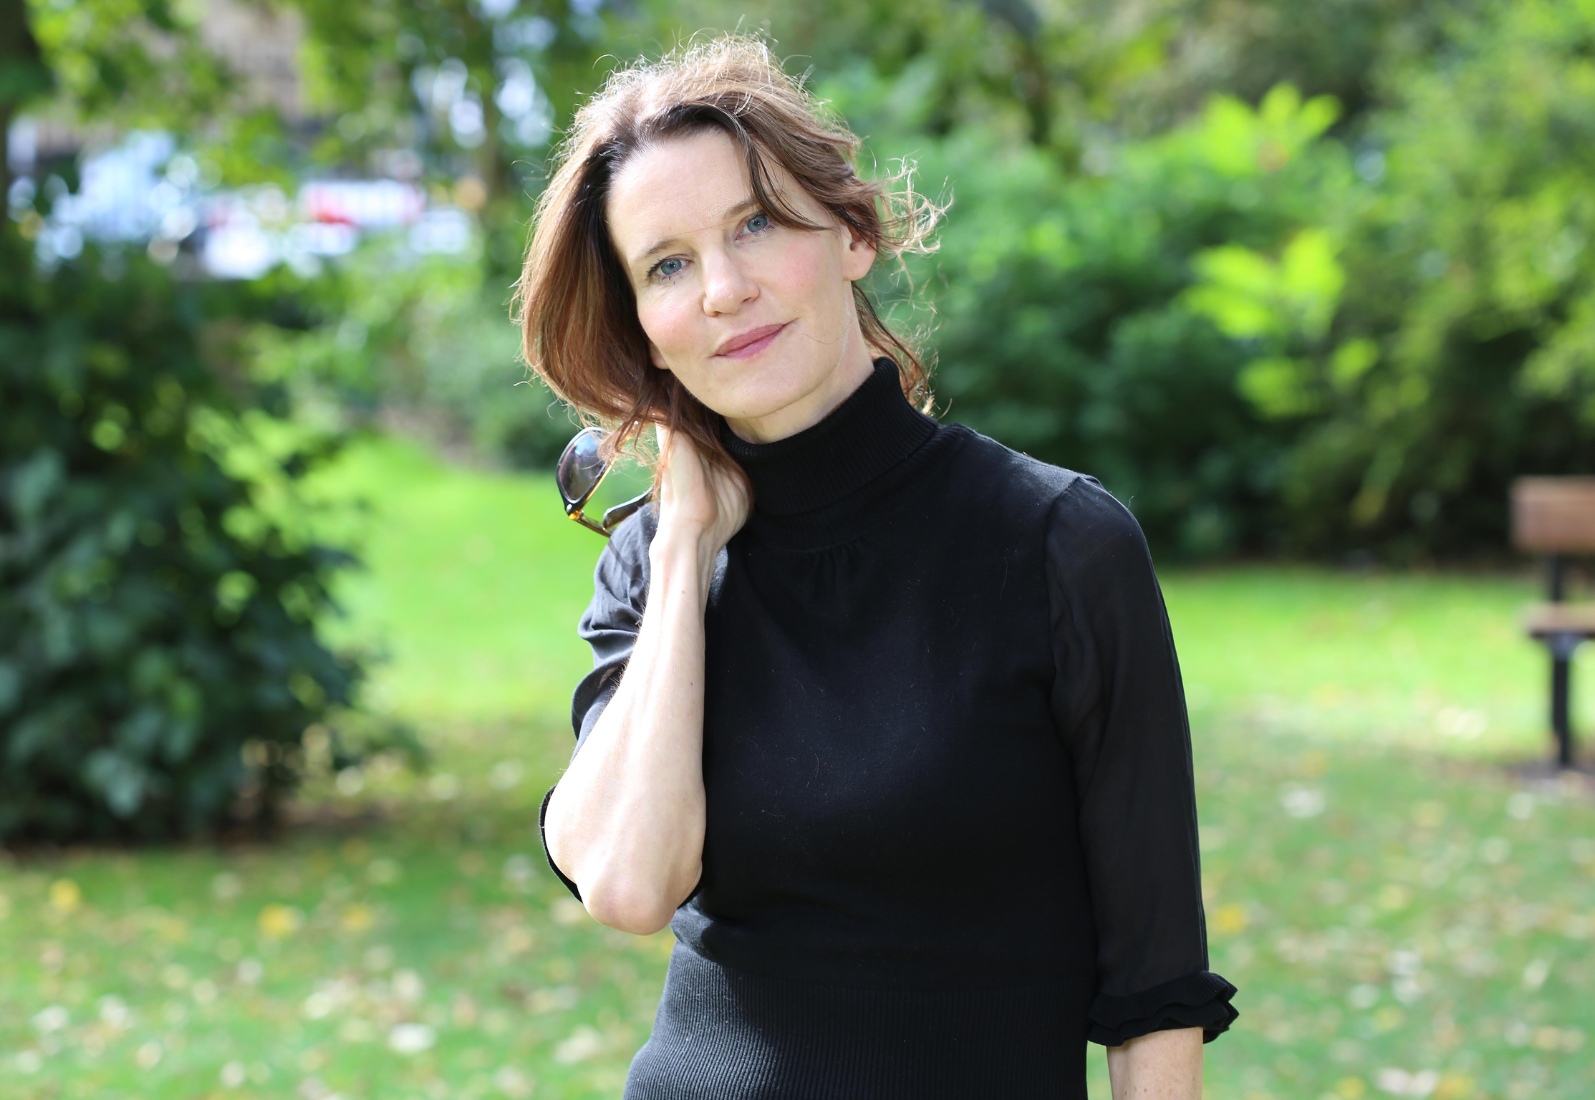 Susie Dent is coming to Raworths Harrogate Literature Festival on 21 October